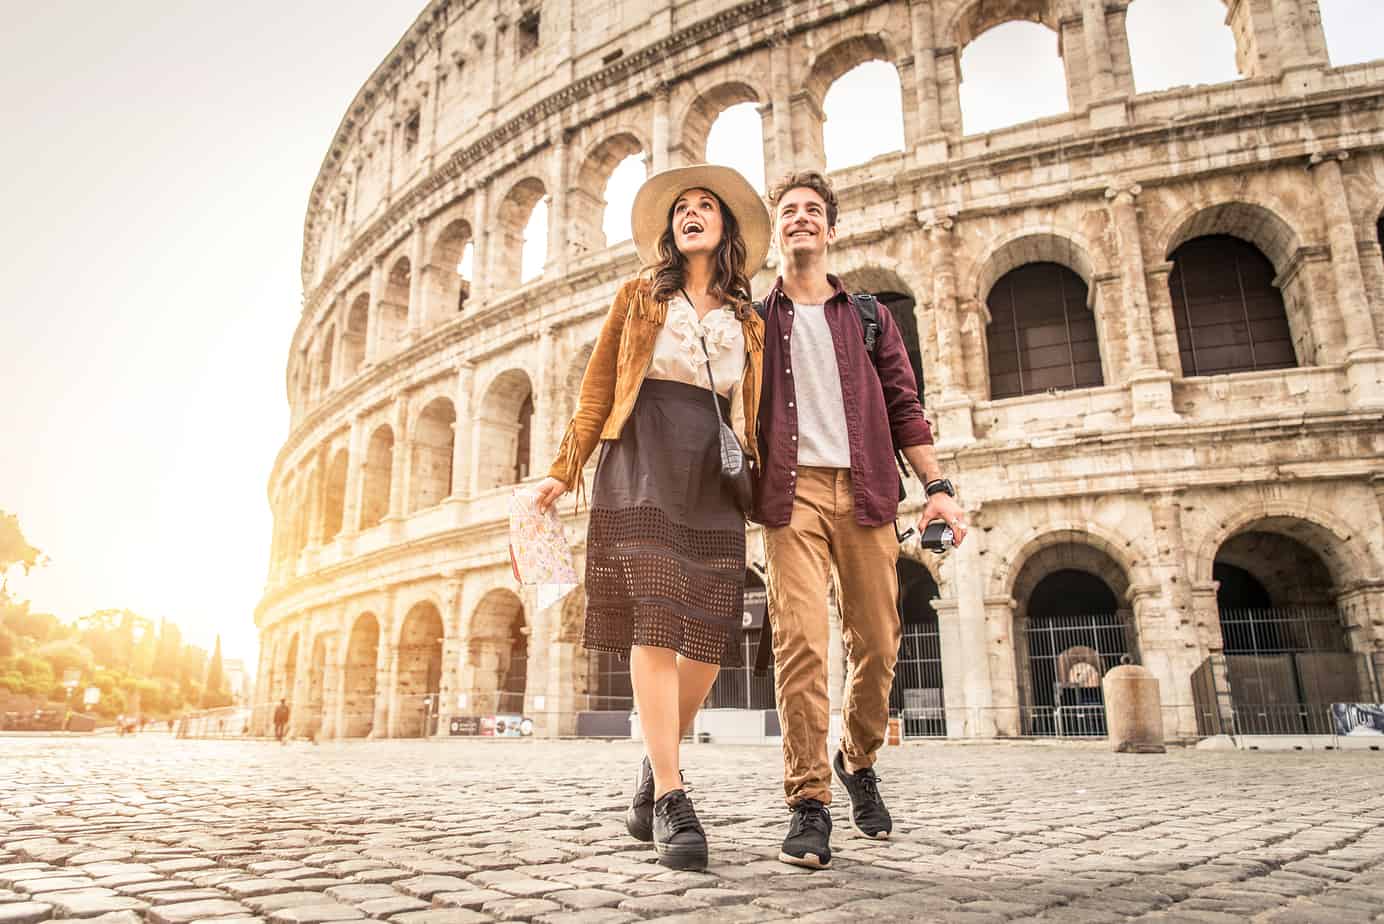 A couple walks while smiling in front of the Coloseum.